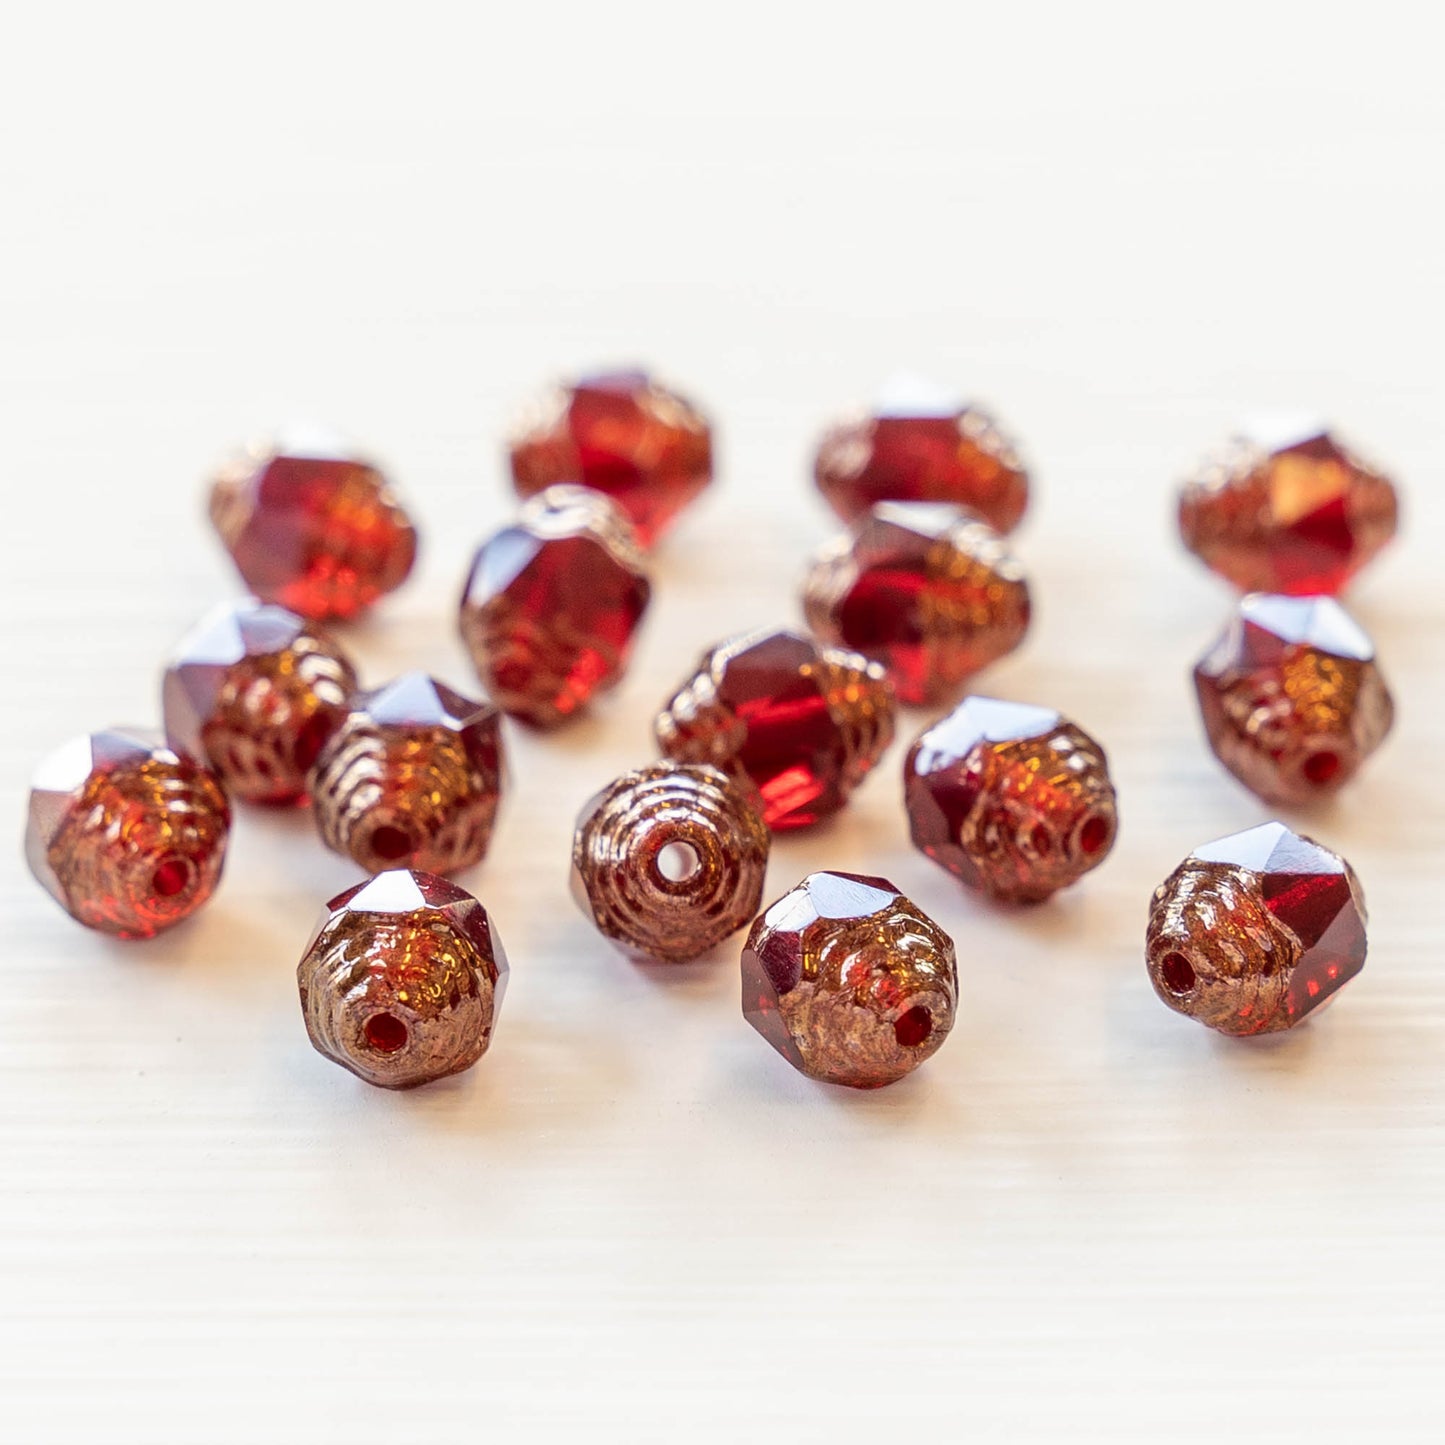 8x6mm Czech Cathedral Beads - Red with Gold Finish - 16 Beads